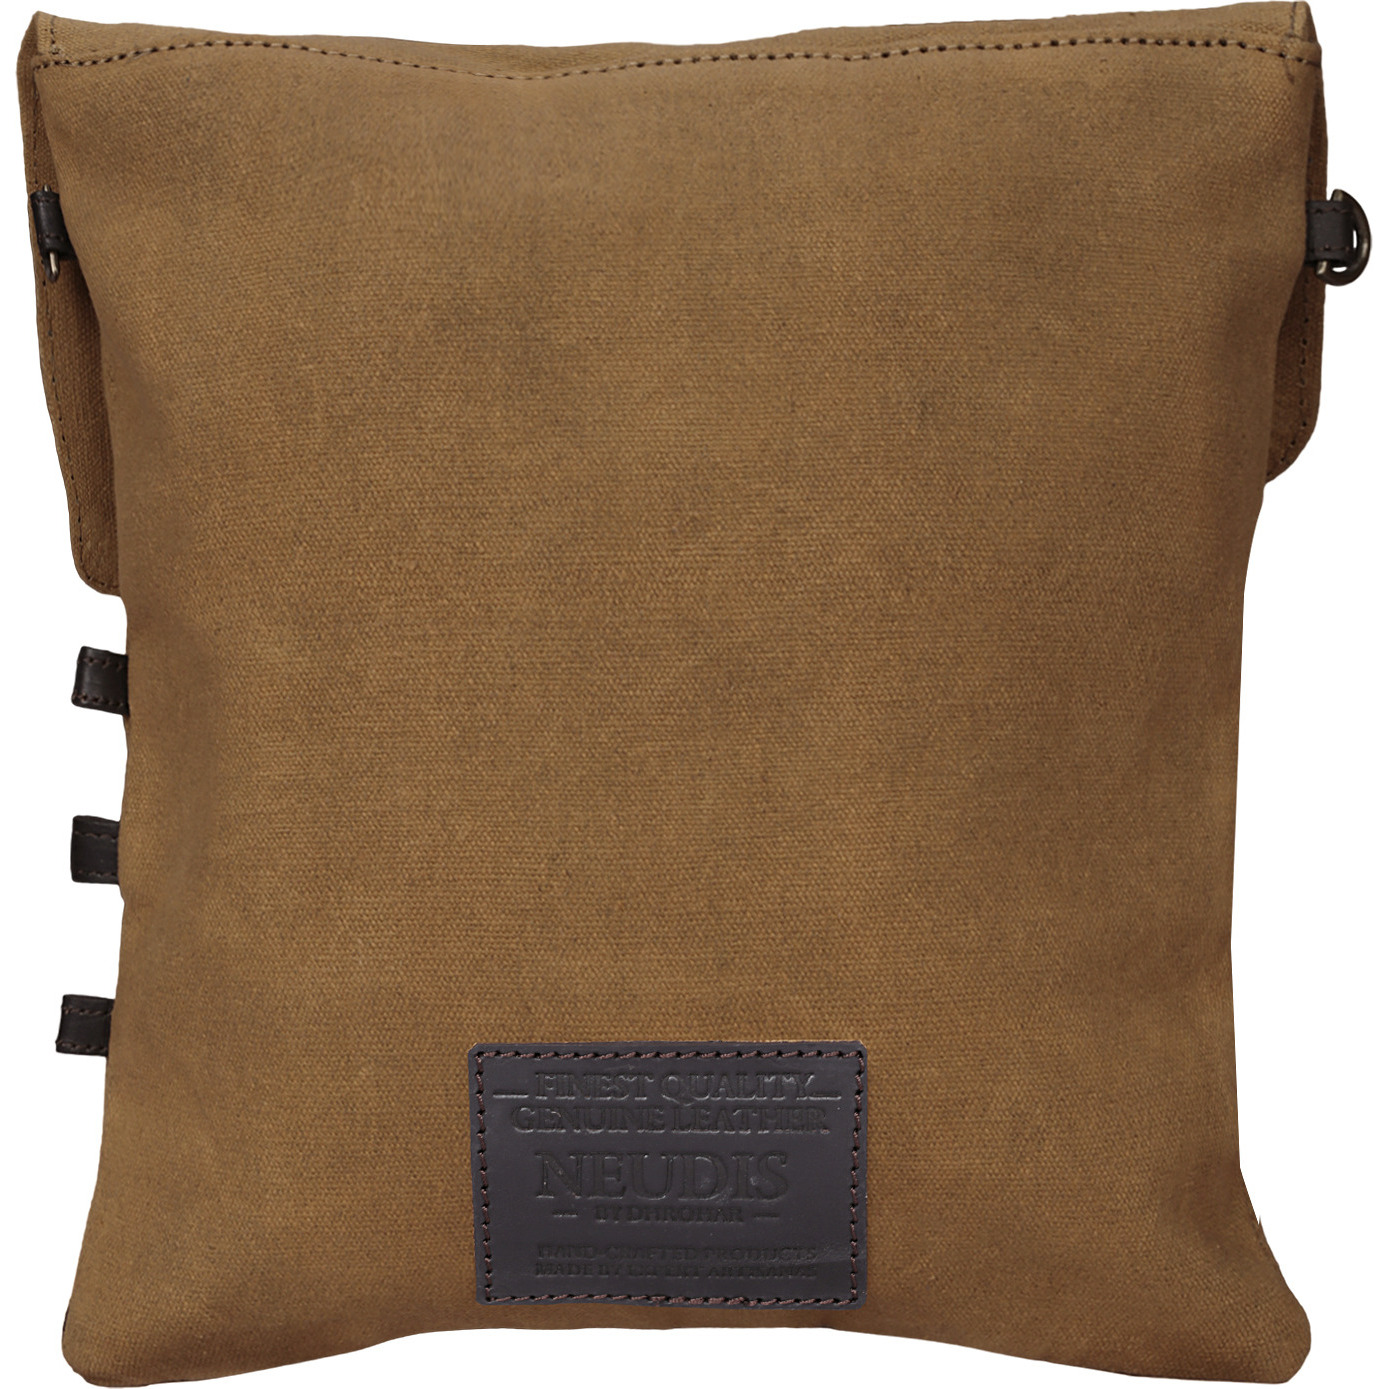 NEUDIS Genuine Leather & Recycled Stone Washed Canvas Travel Sling / Cross Body Bag for iPad & Tablet - Bike - Brown